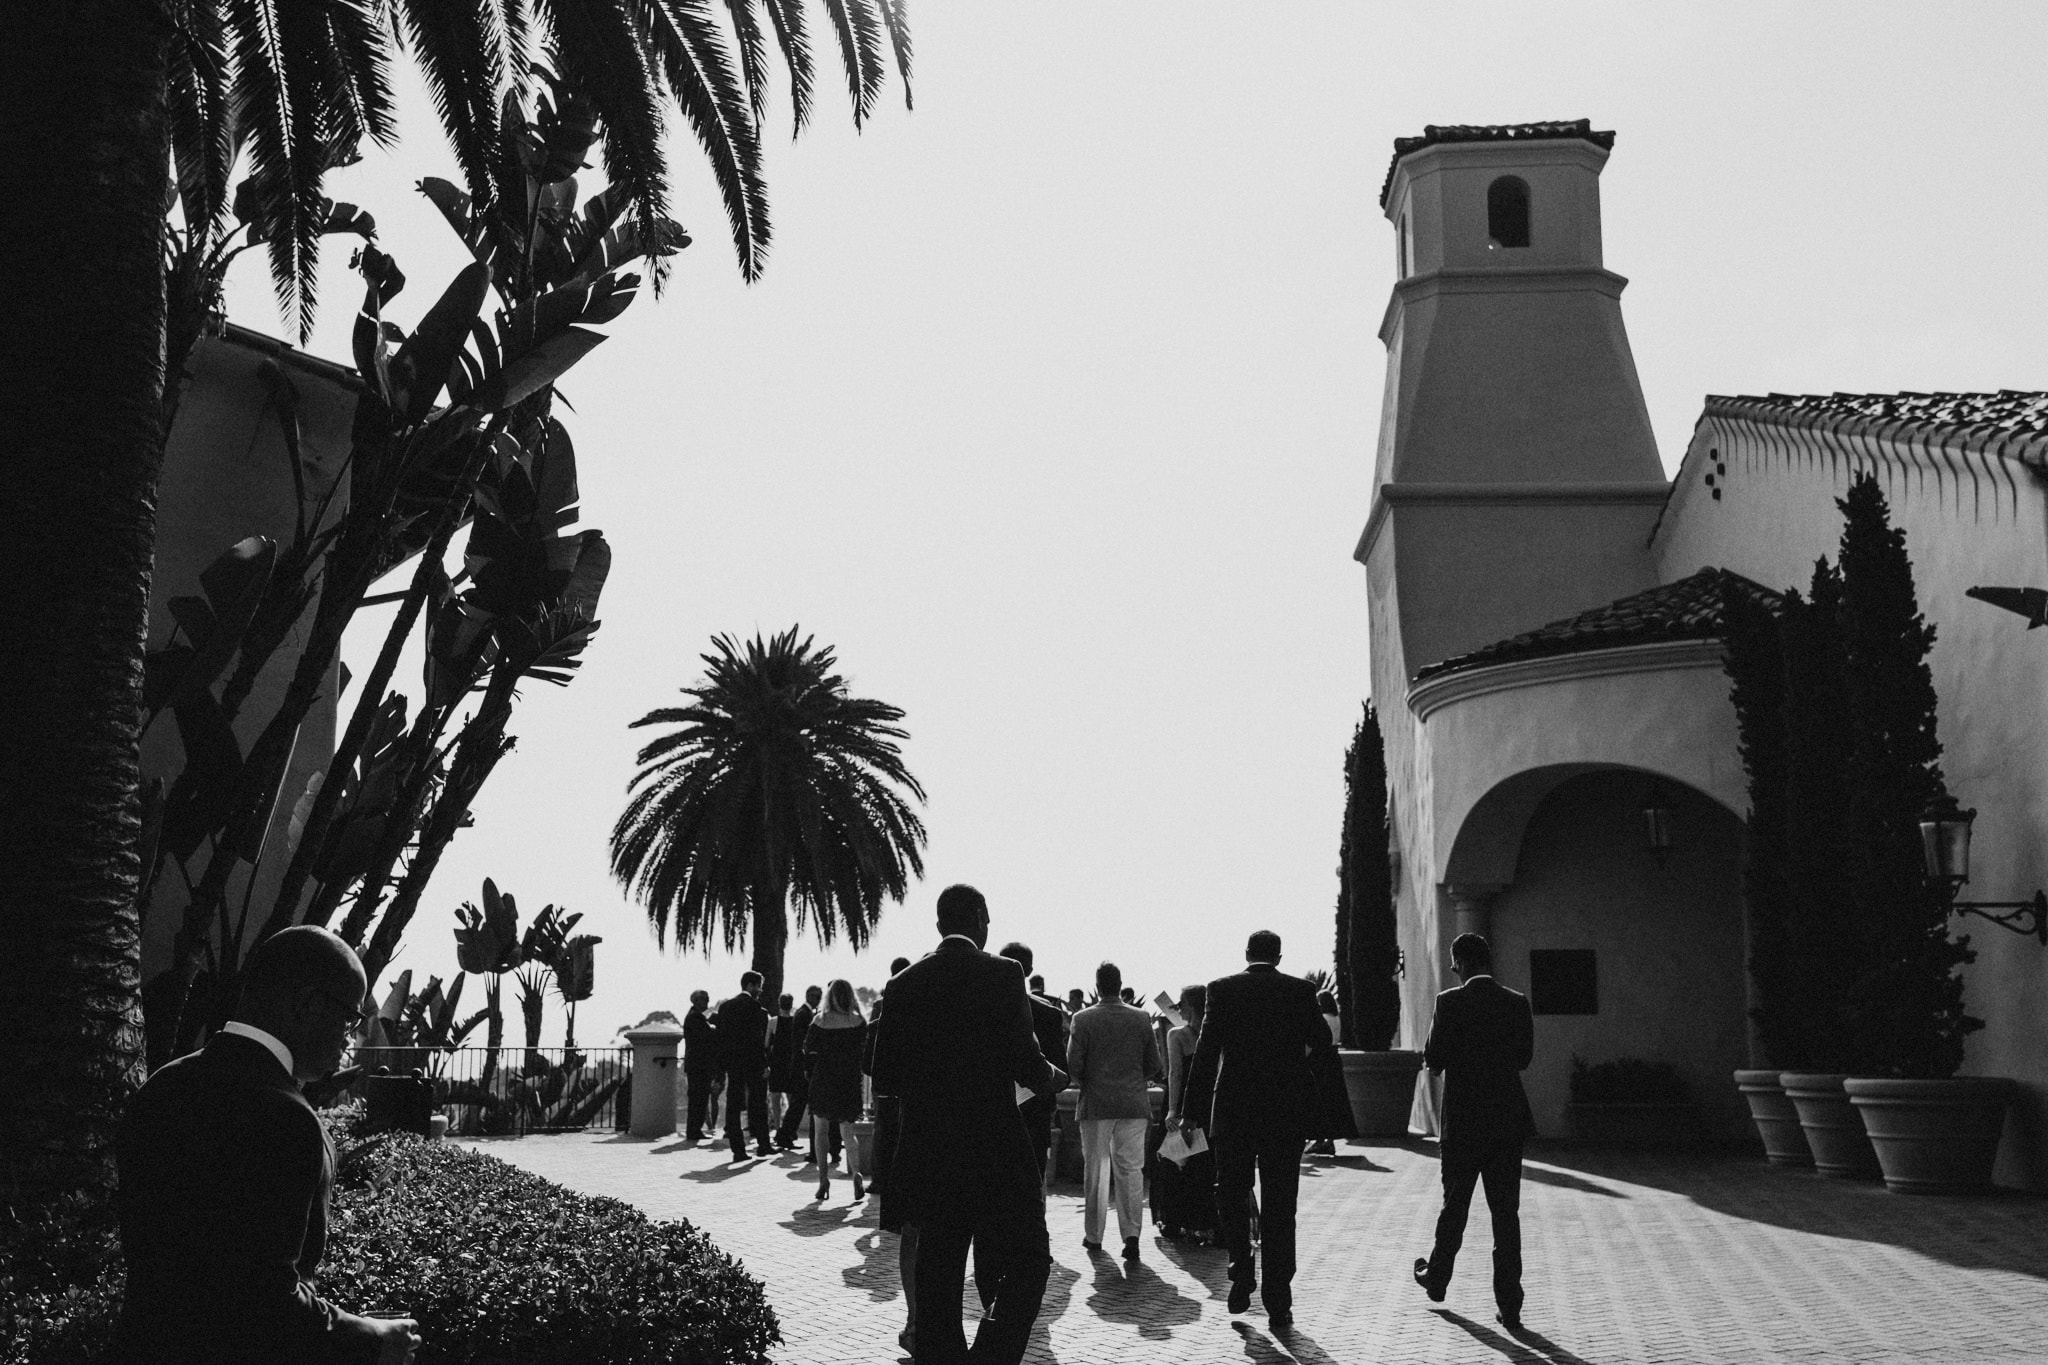 Guests walk outside of The Resort at Pelican Hill, preparing for a beautiful wedding ceremony in Newport Beach.